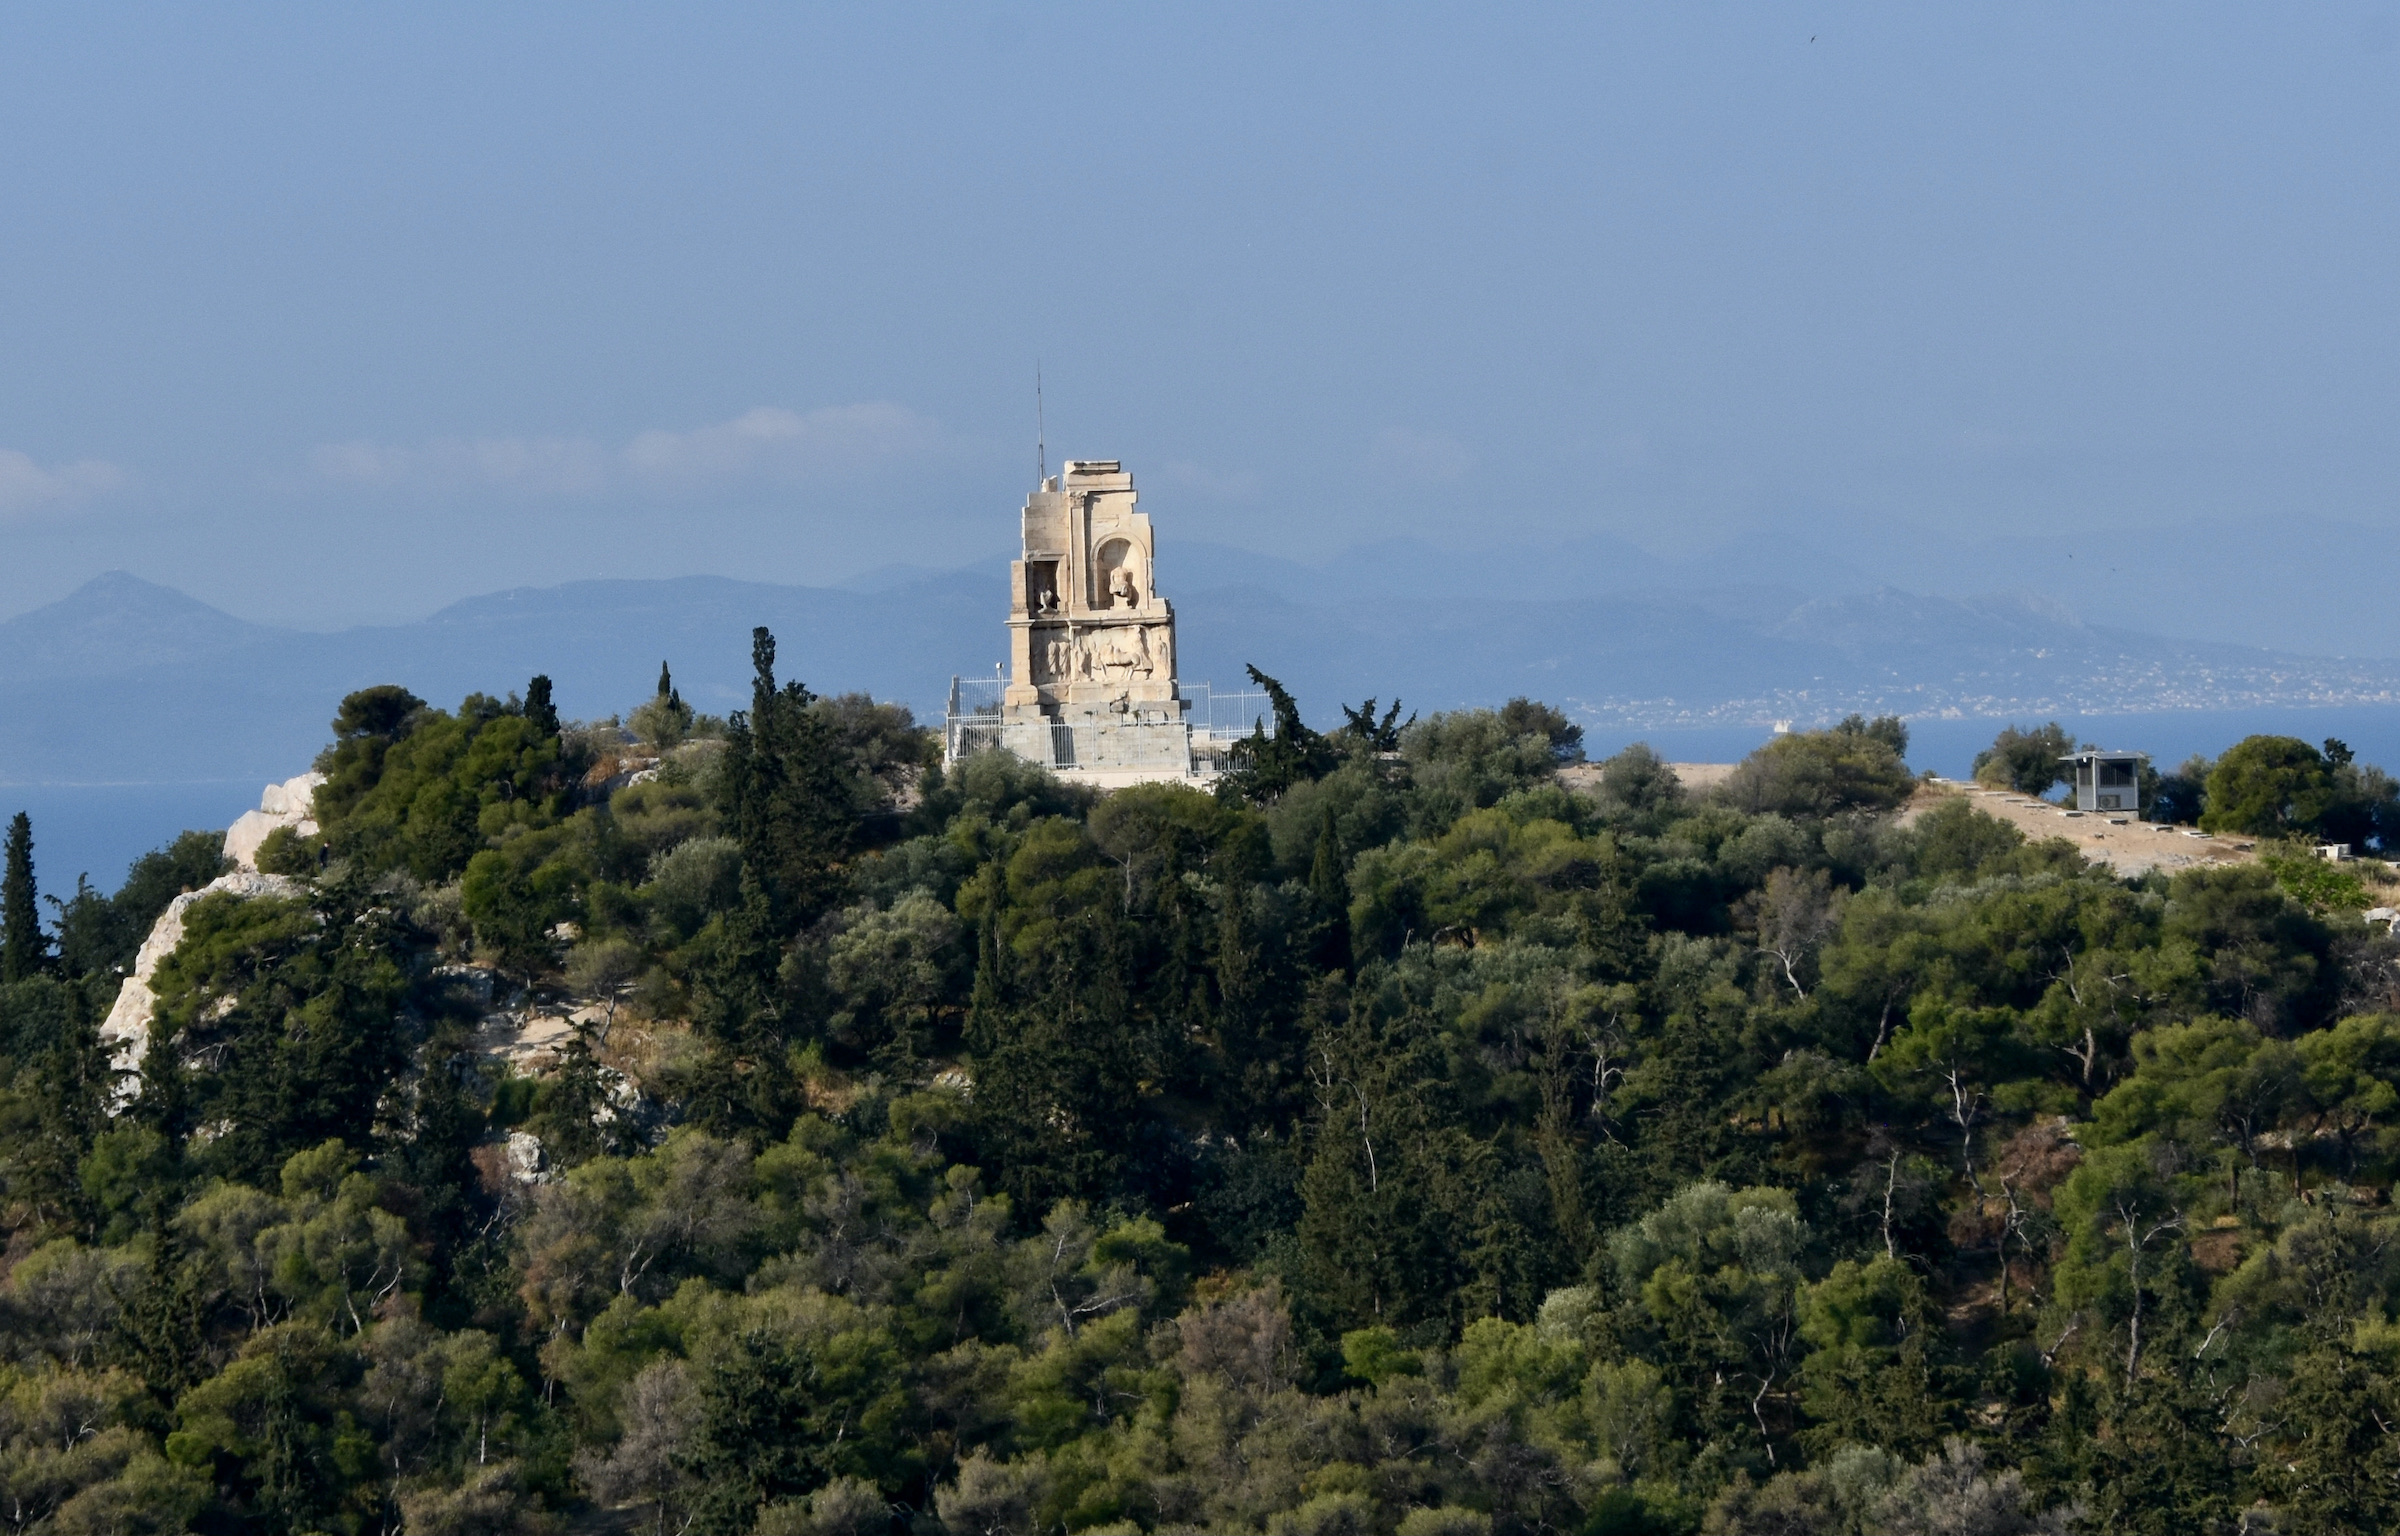 Philopappos Monument from the Acropolis